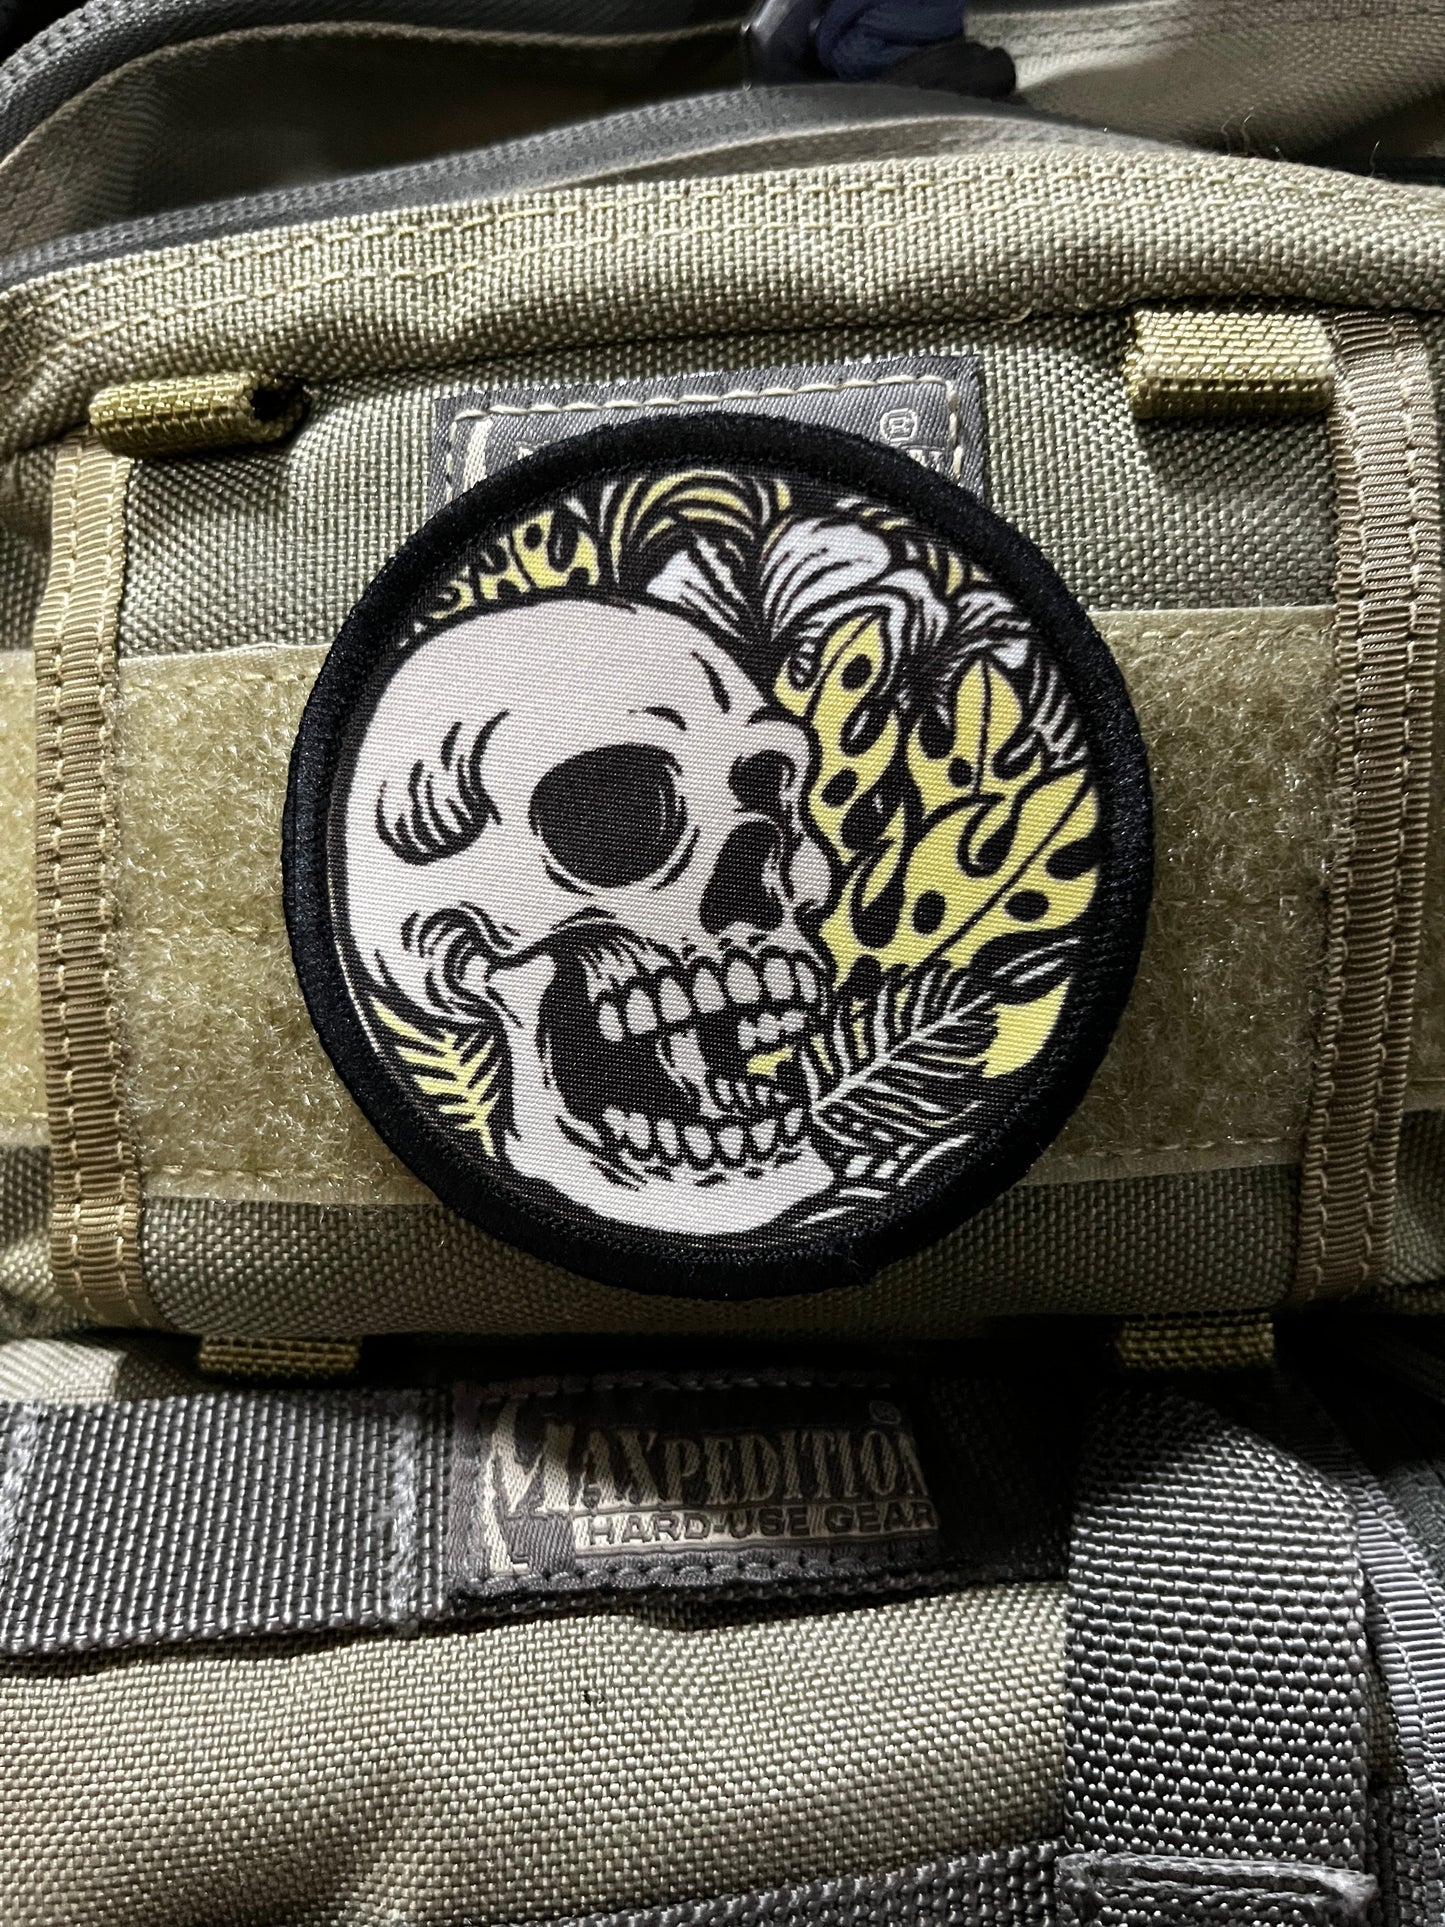 3" Skull Tattoo Morale Patch Morale Patches Redheaded T Shirts 